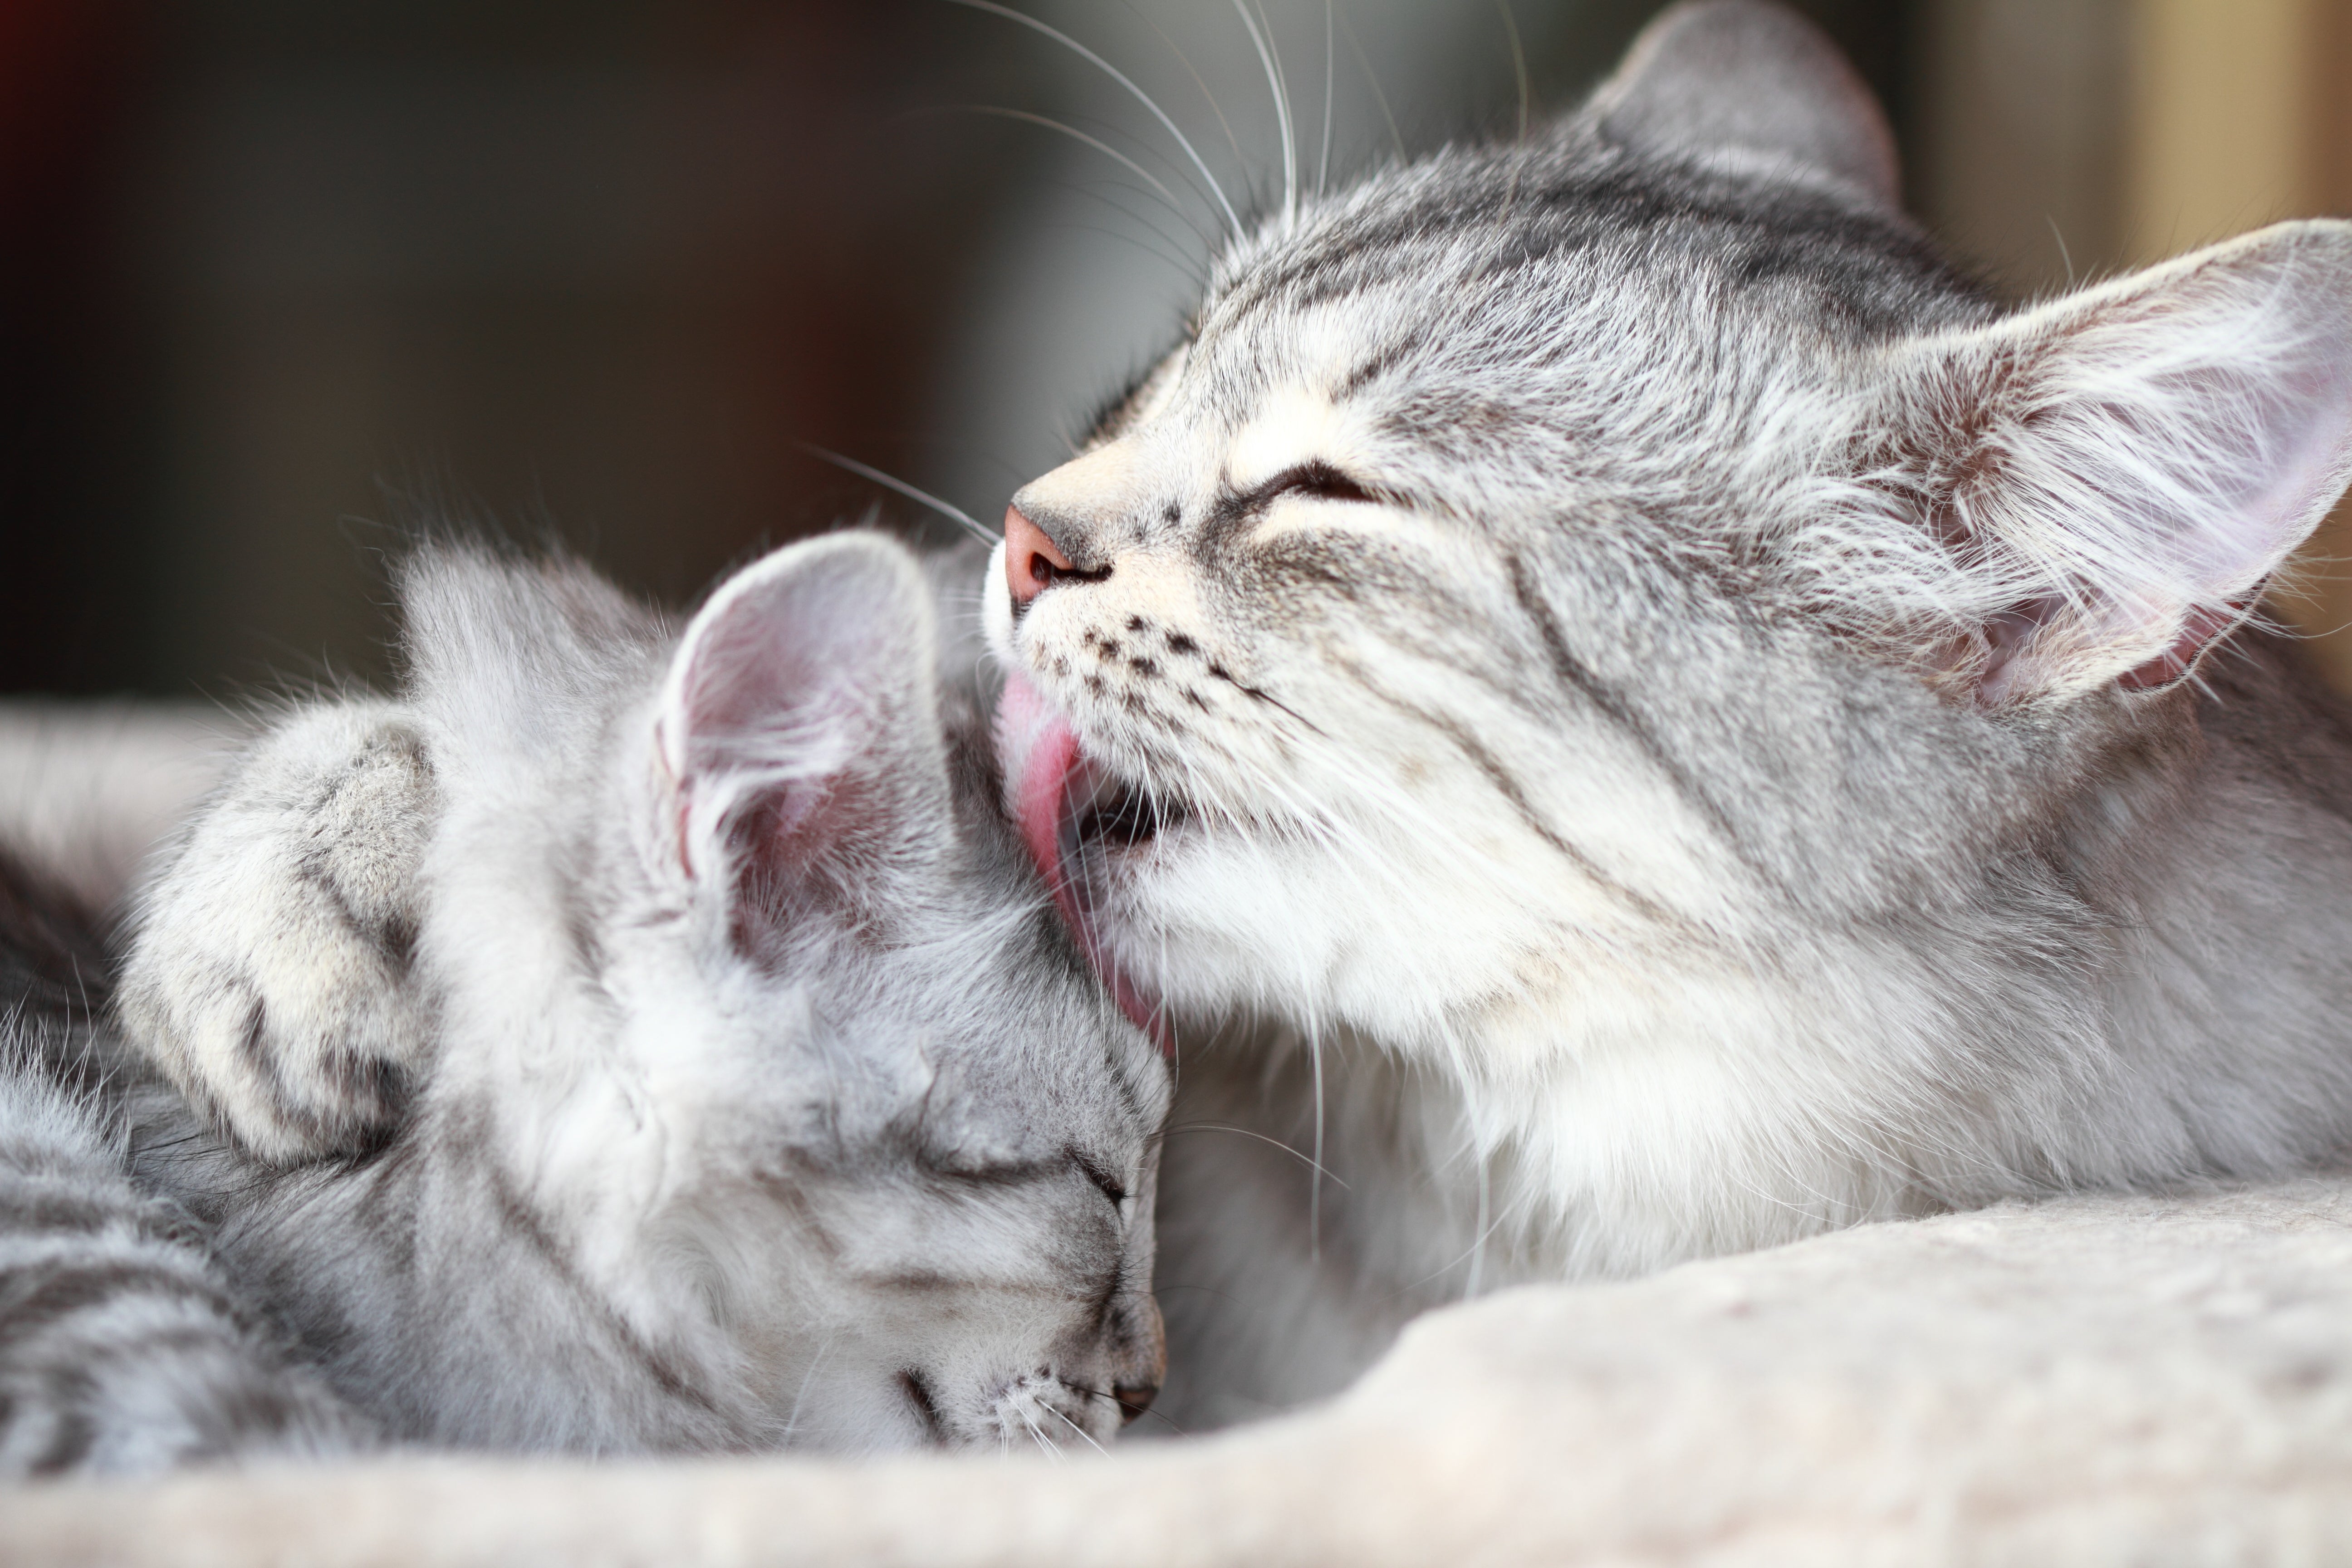 Mutual Grooming Is A Sign Of A Cat’s Affection